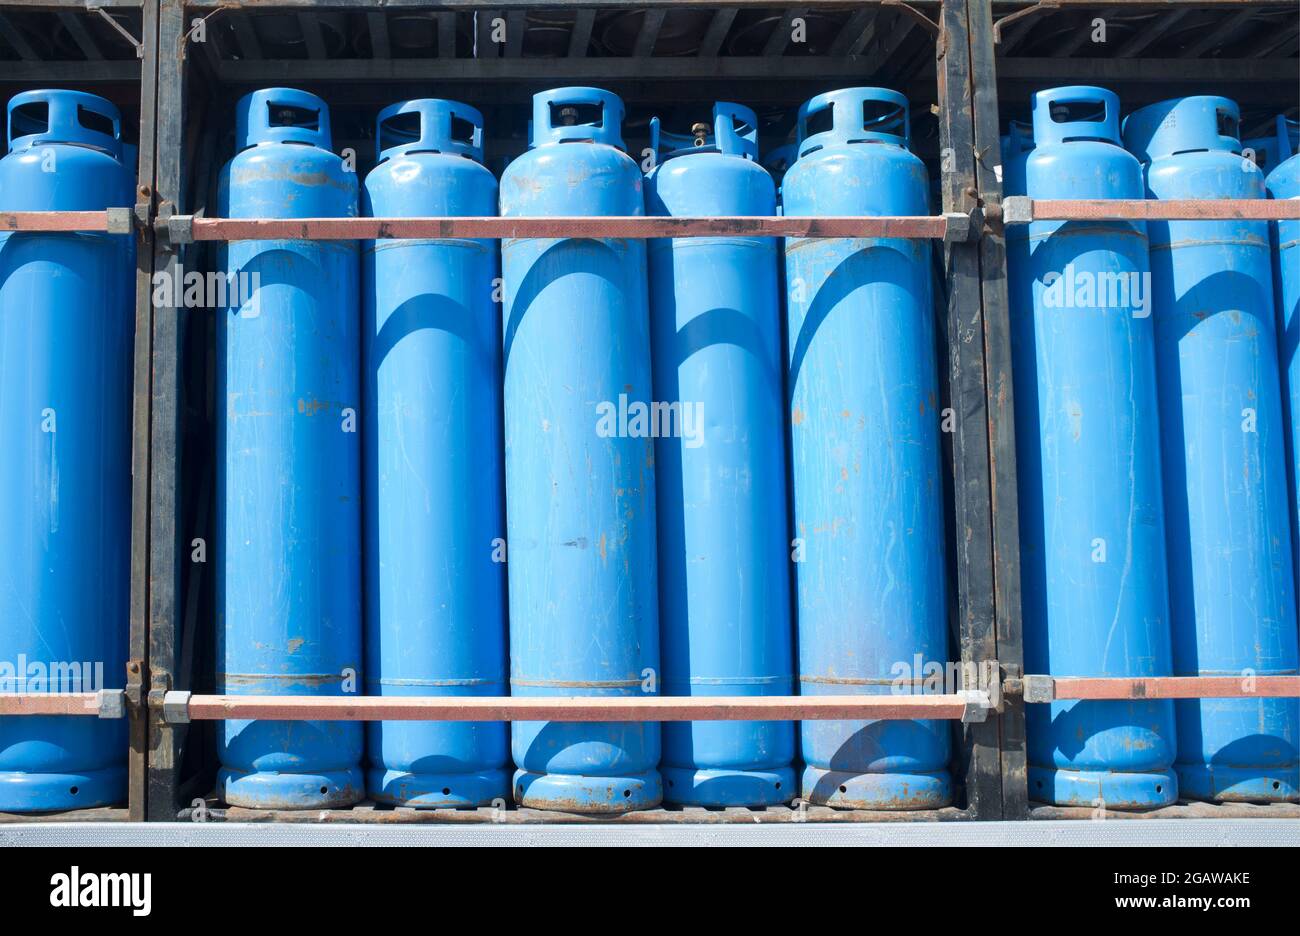 Loads of propane gas blue cylinders assorted on a truck. Tazardous materials transportation Stock Photo